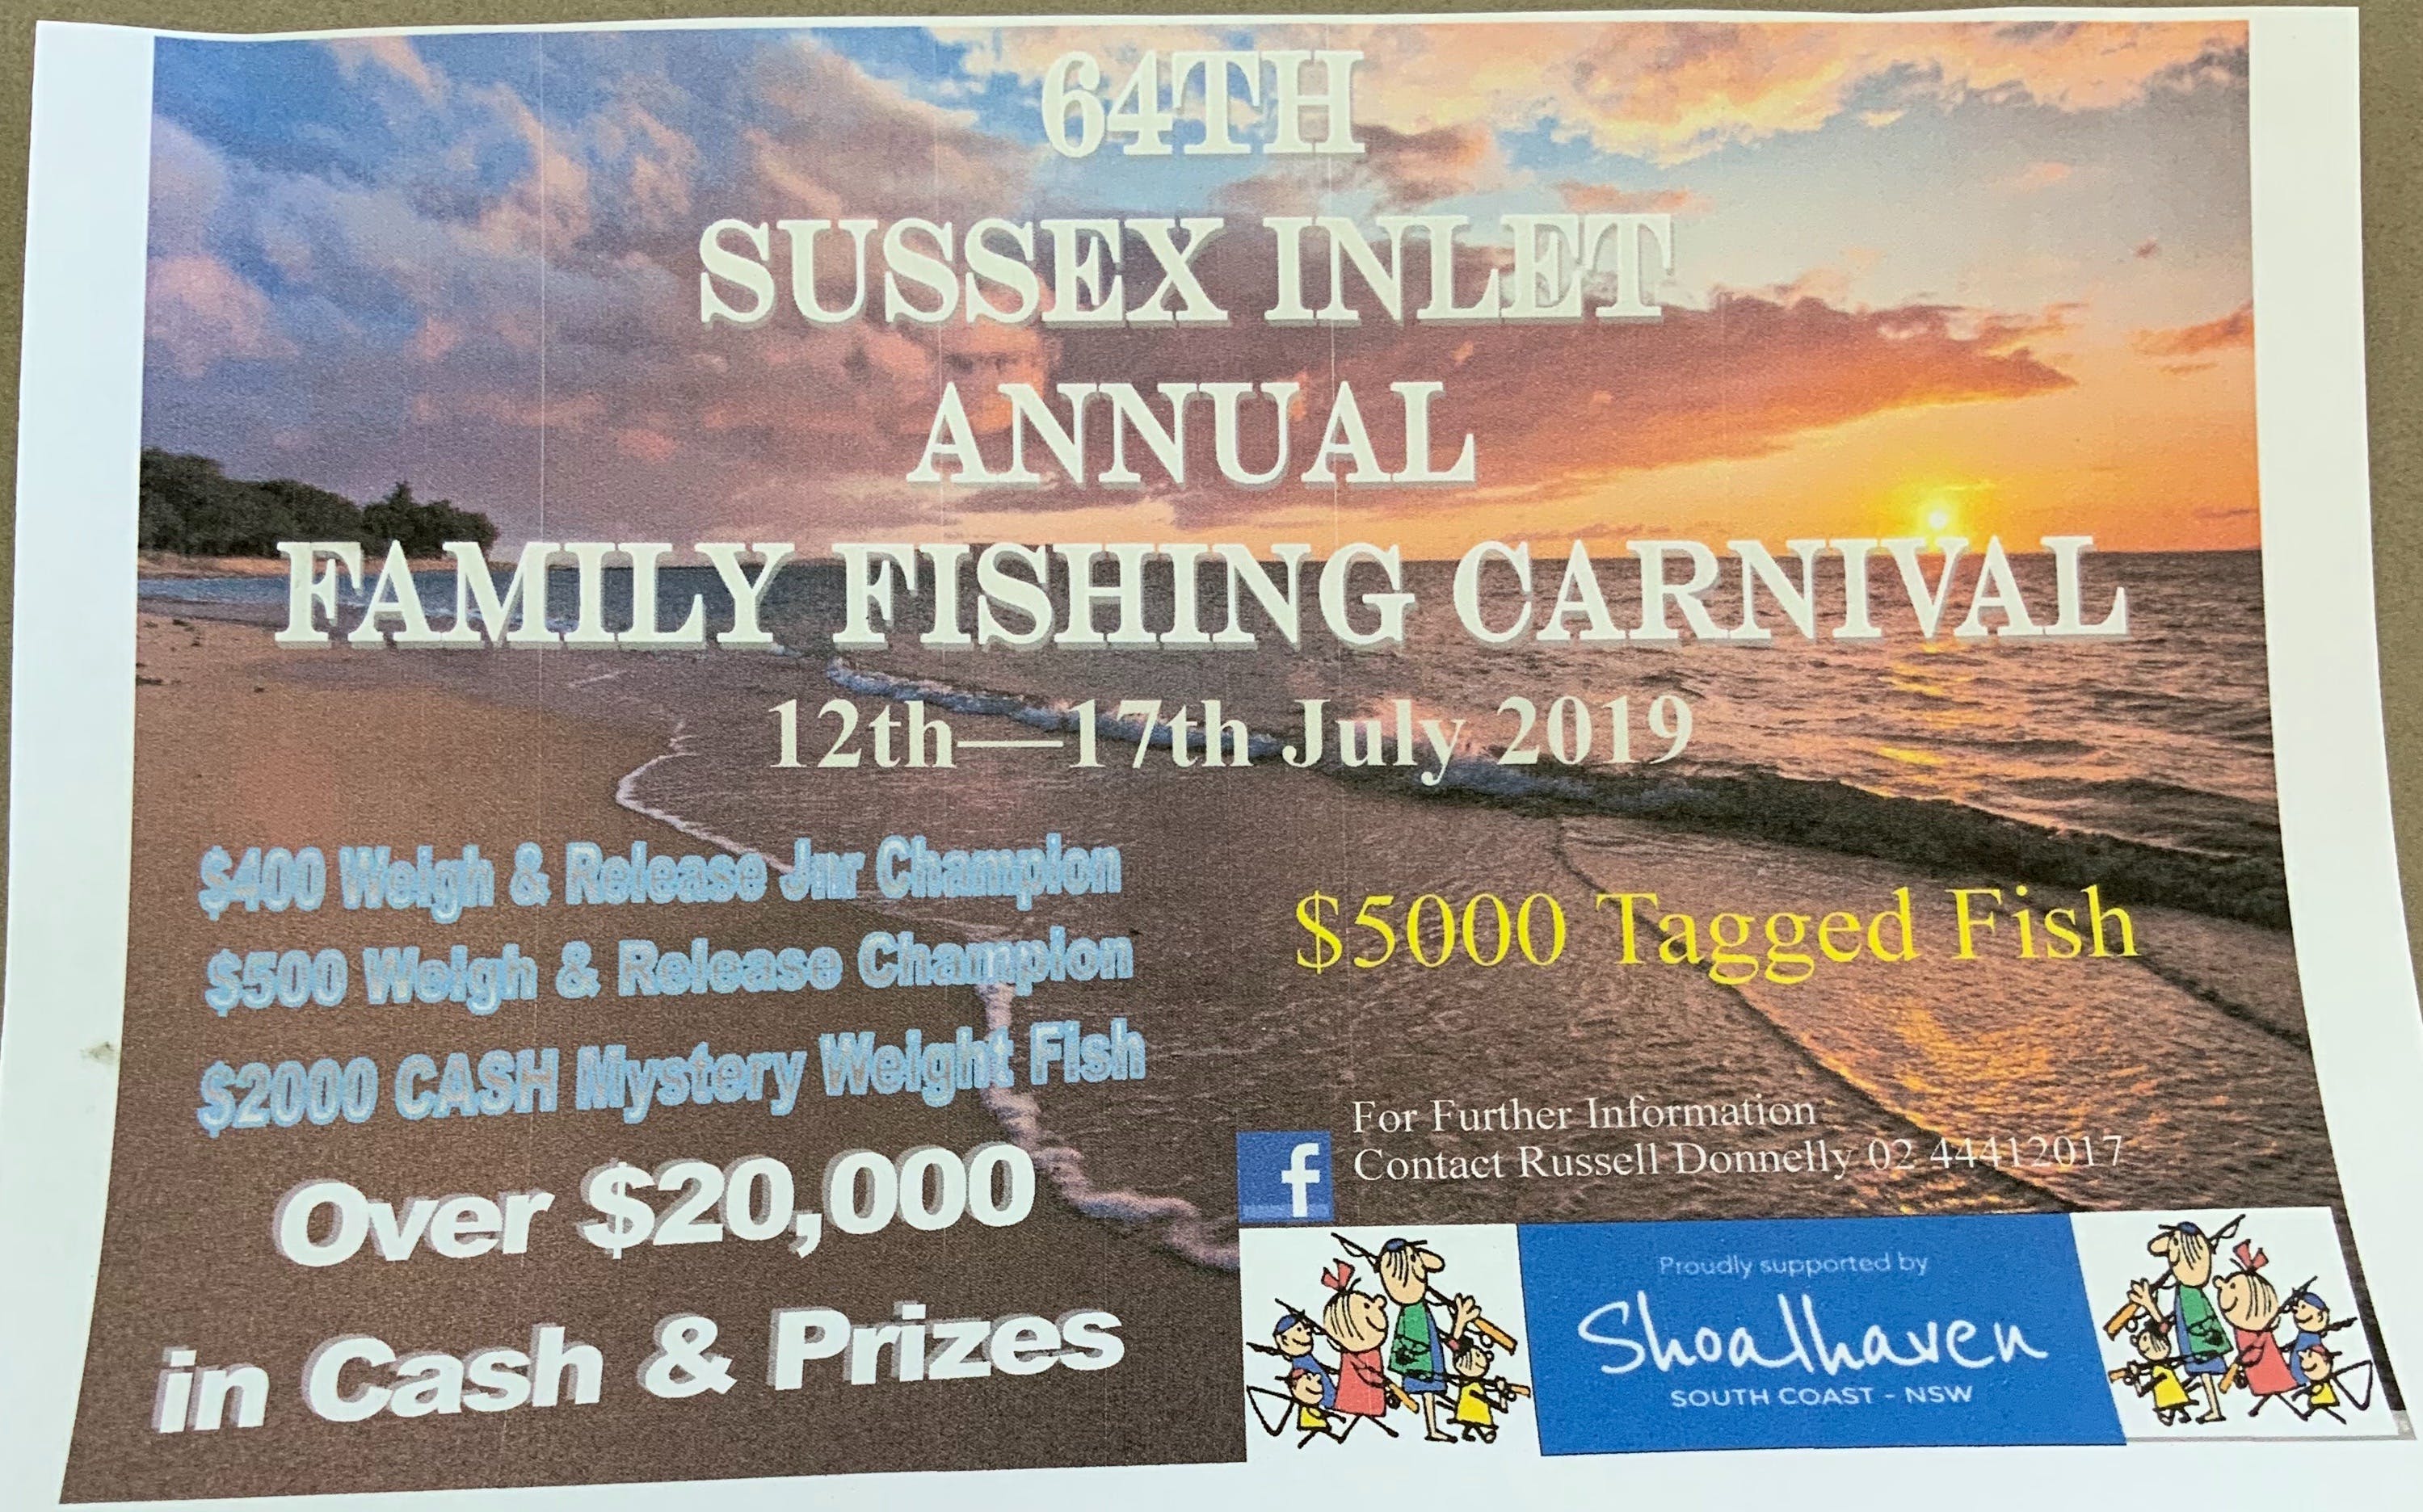 The Sussex Inlet Annual Family Fishing Carnival - Melbourne Tourism